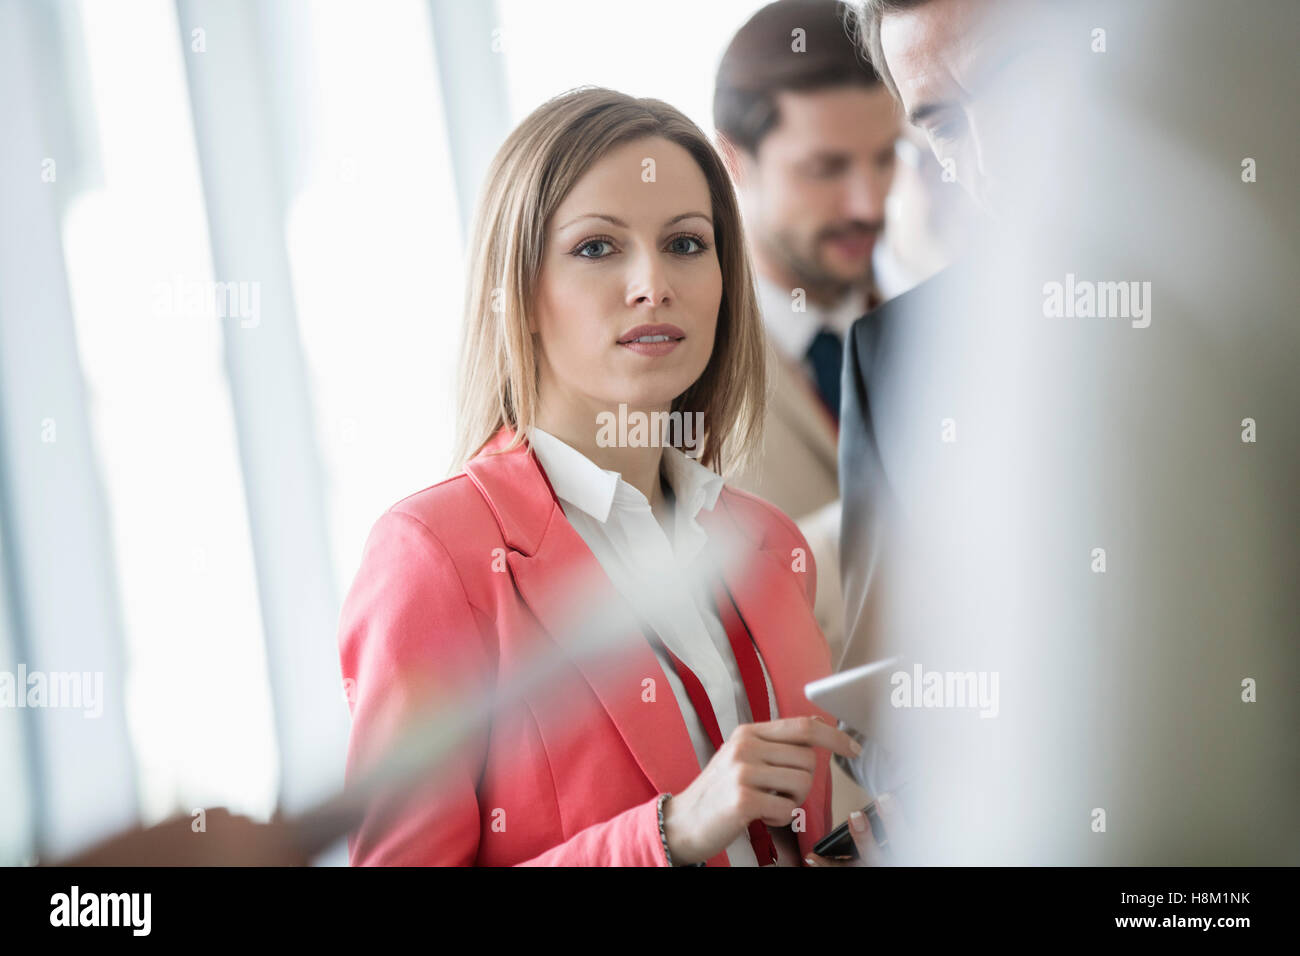 Portrait of confident businesswoman standing with colleagues in brightly lit convention center Stock Photo